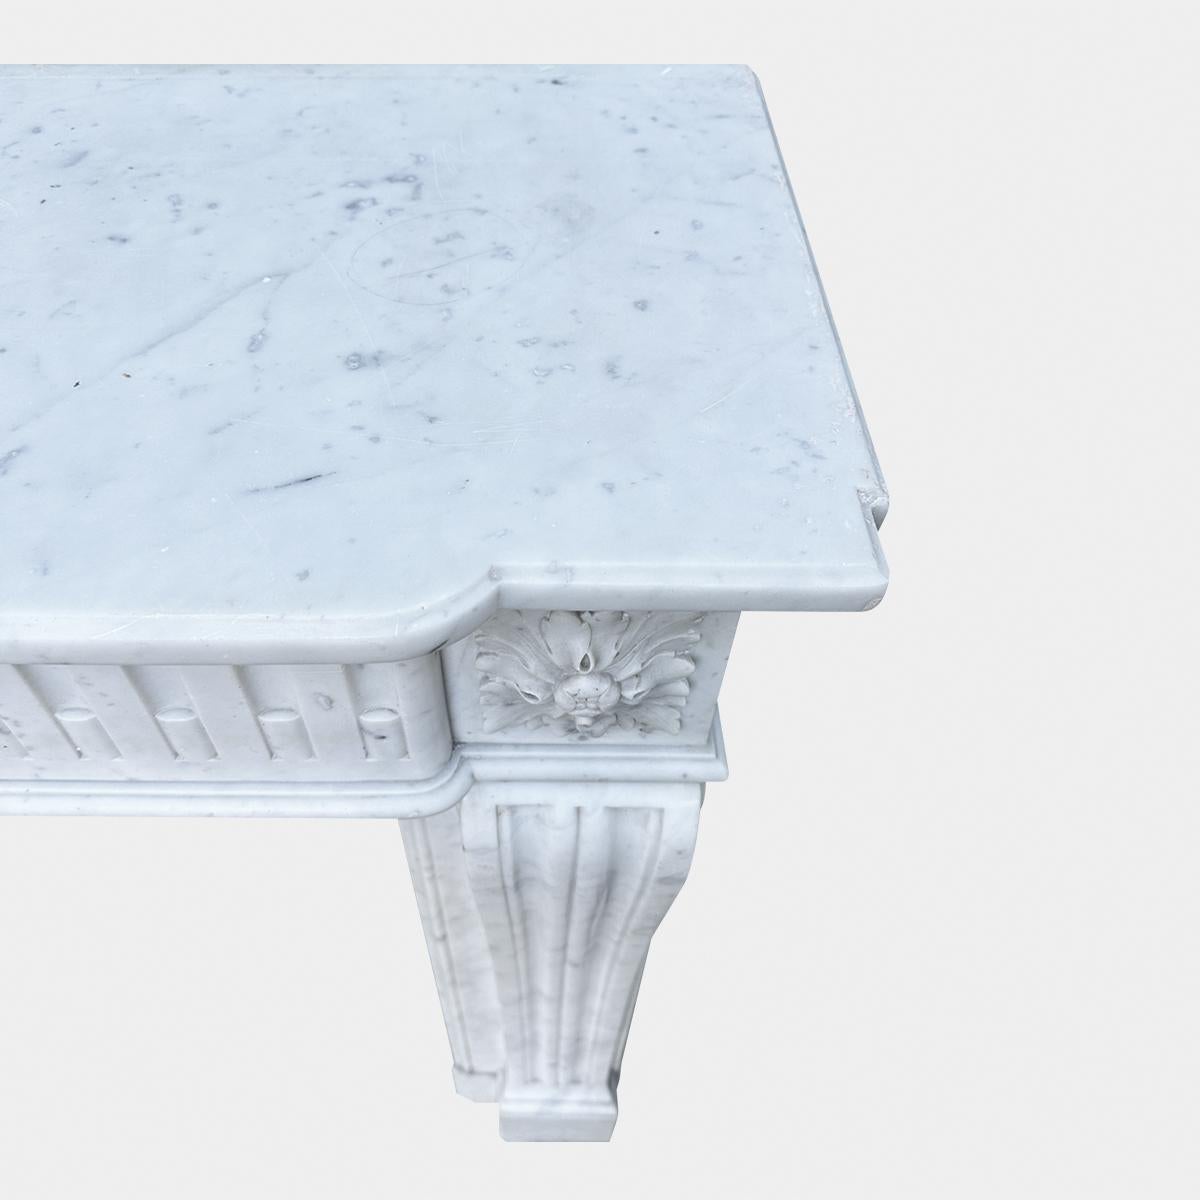 A petit antique 19th century Carrara Marble fireplace in the Louis XVI manner
The console jambs twin fluted terminating in classical square Patarae corner blocks. The bow fronted frieze with stop flutes and above a conforming bow fronted shelf.